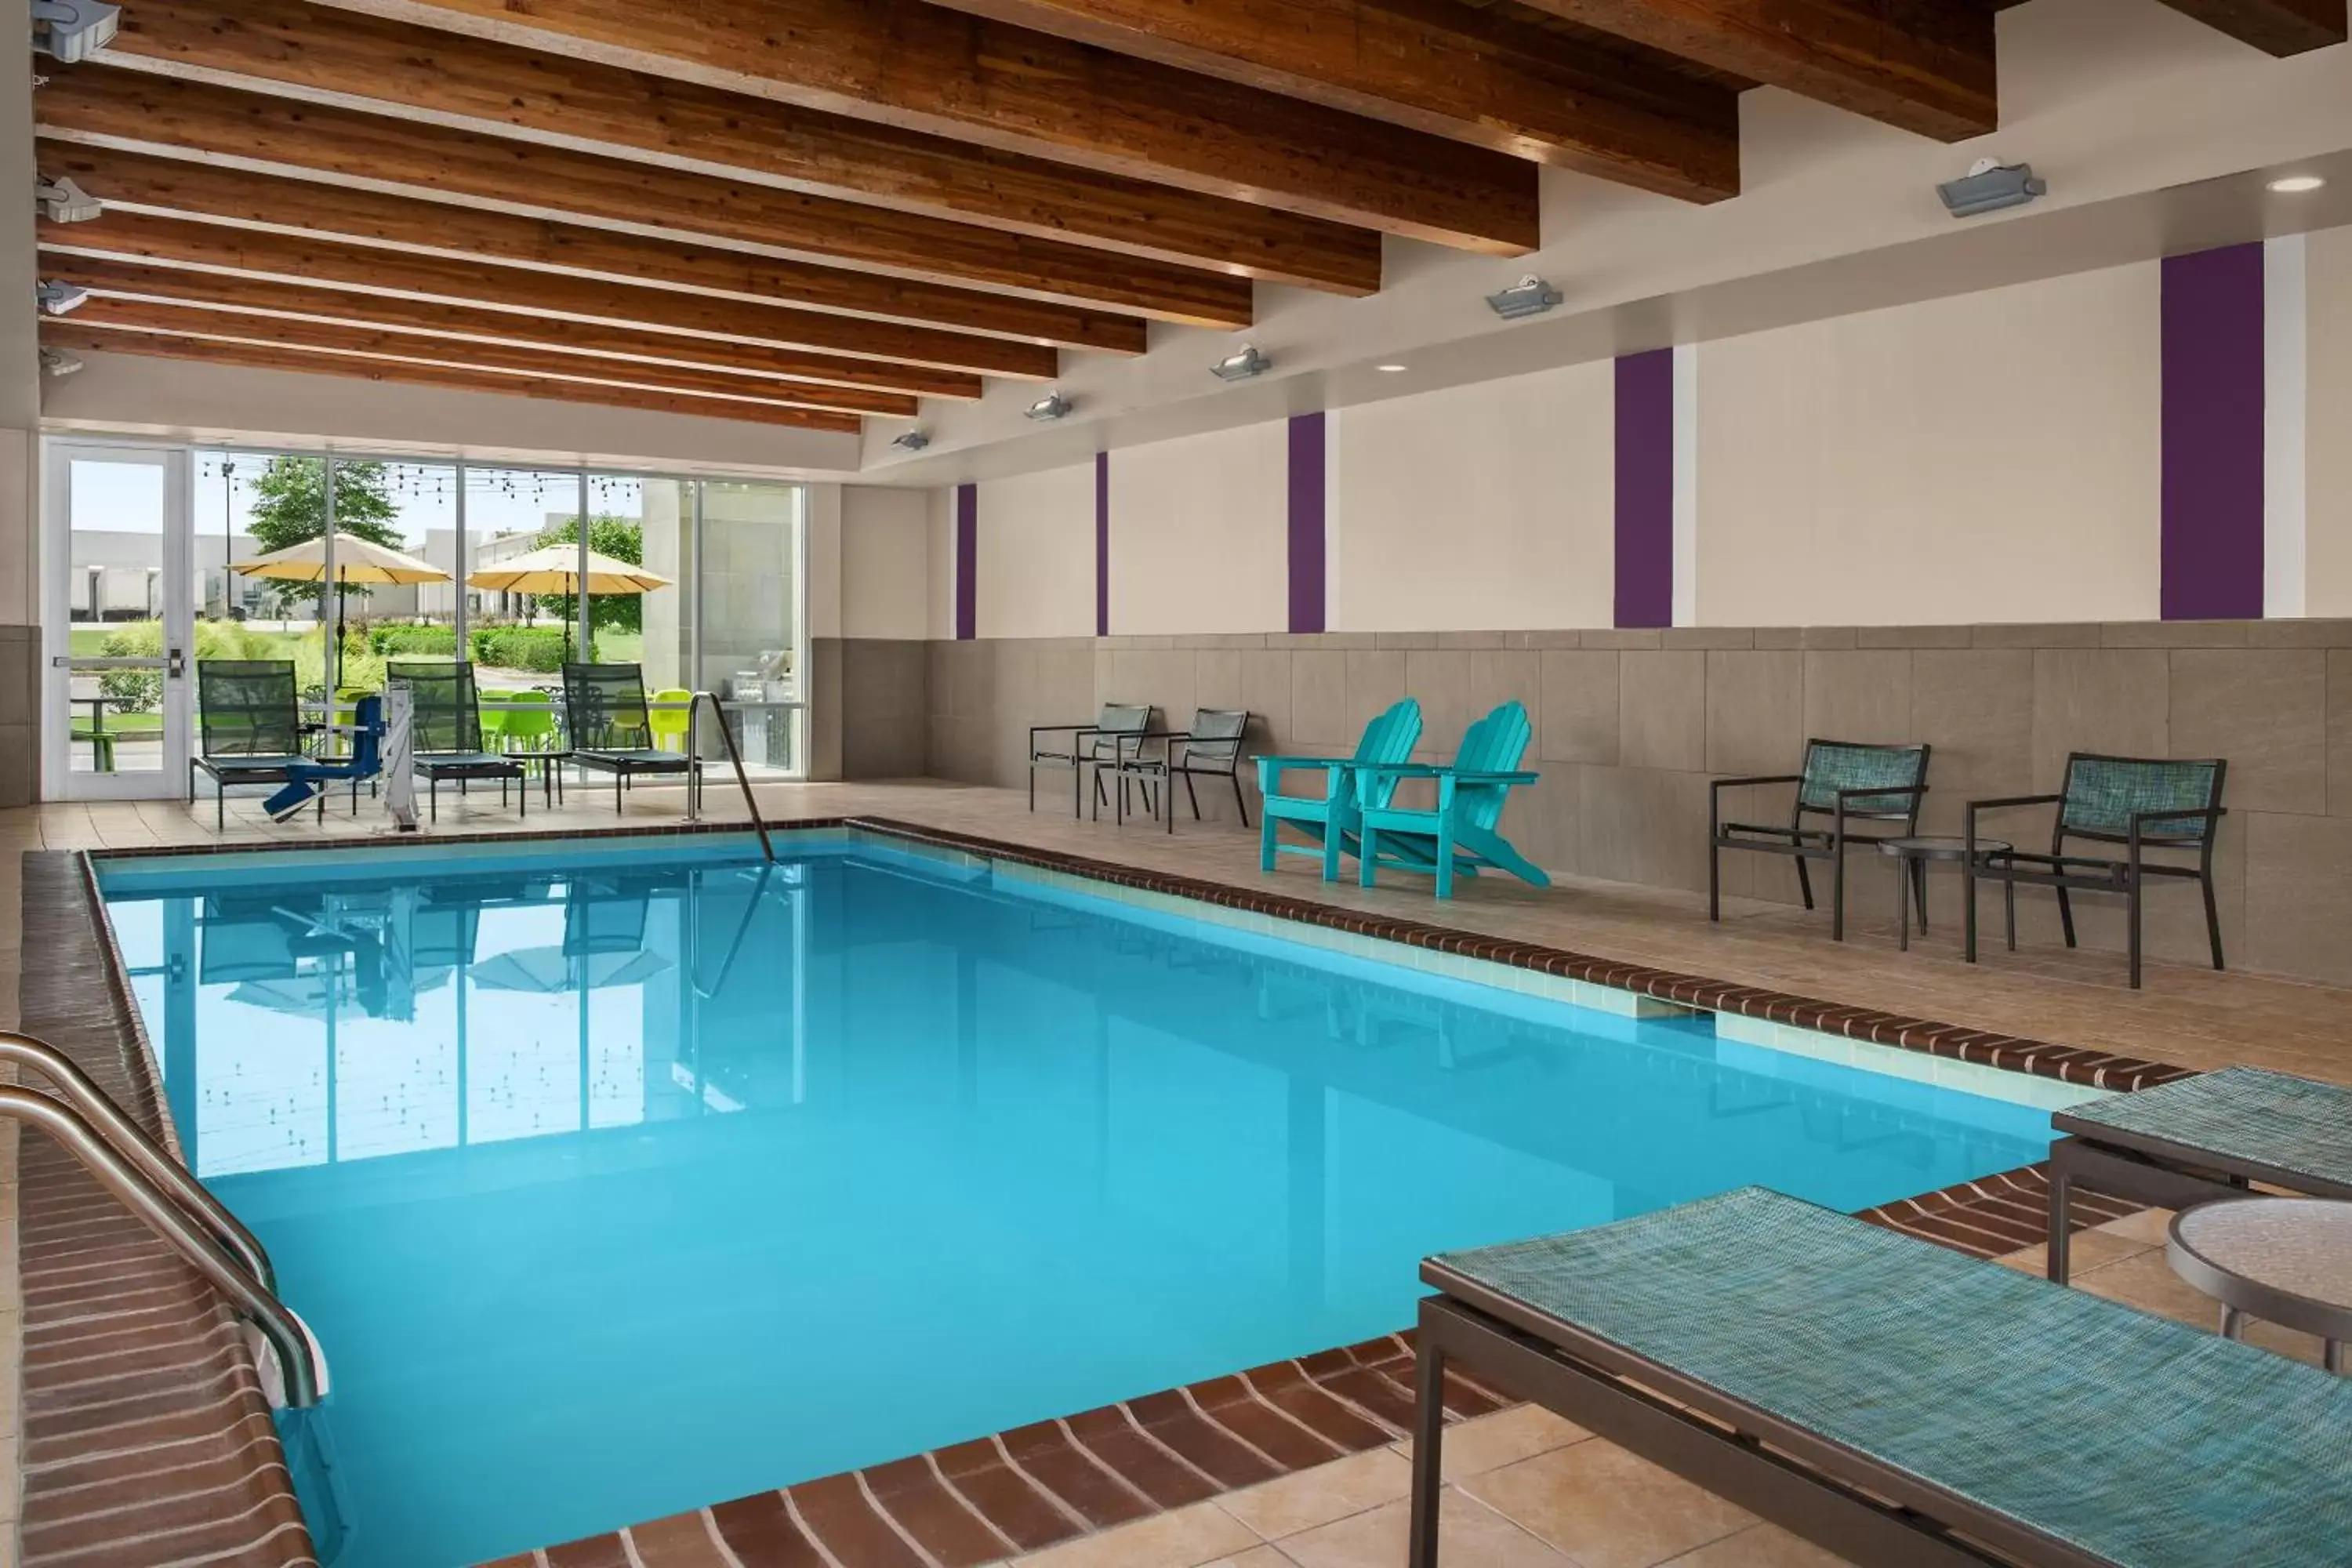 Swimming Pool in Home2 Suites by Hilton - Memphis/Southaven